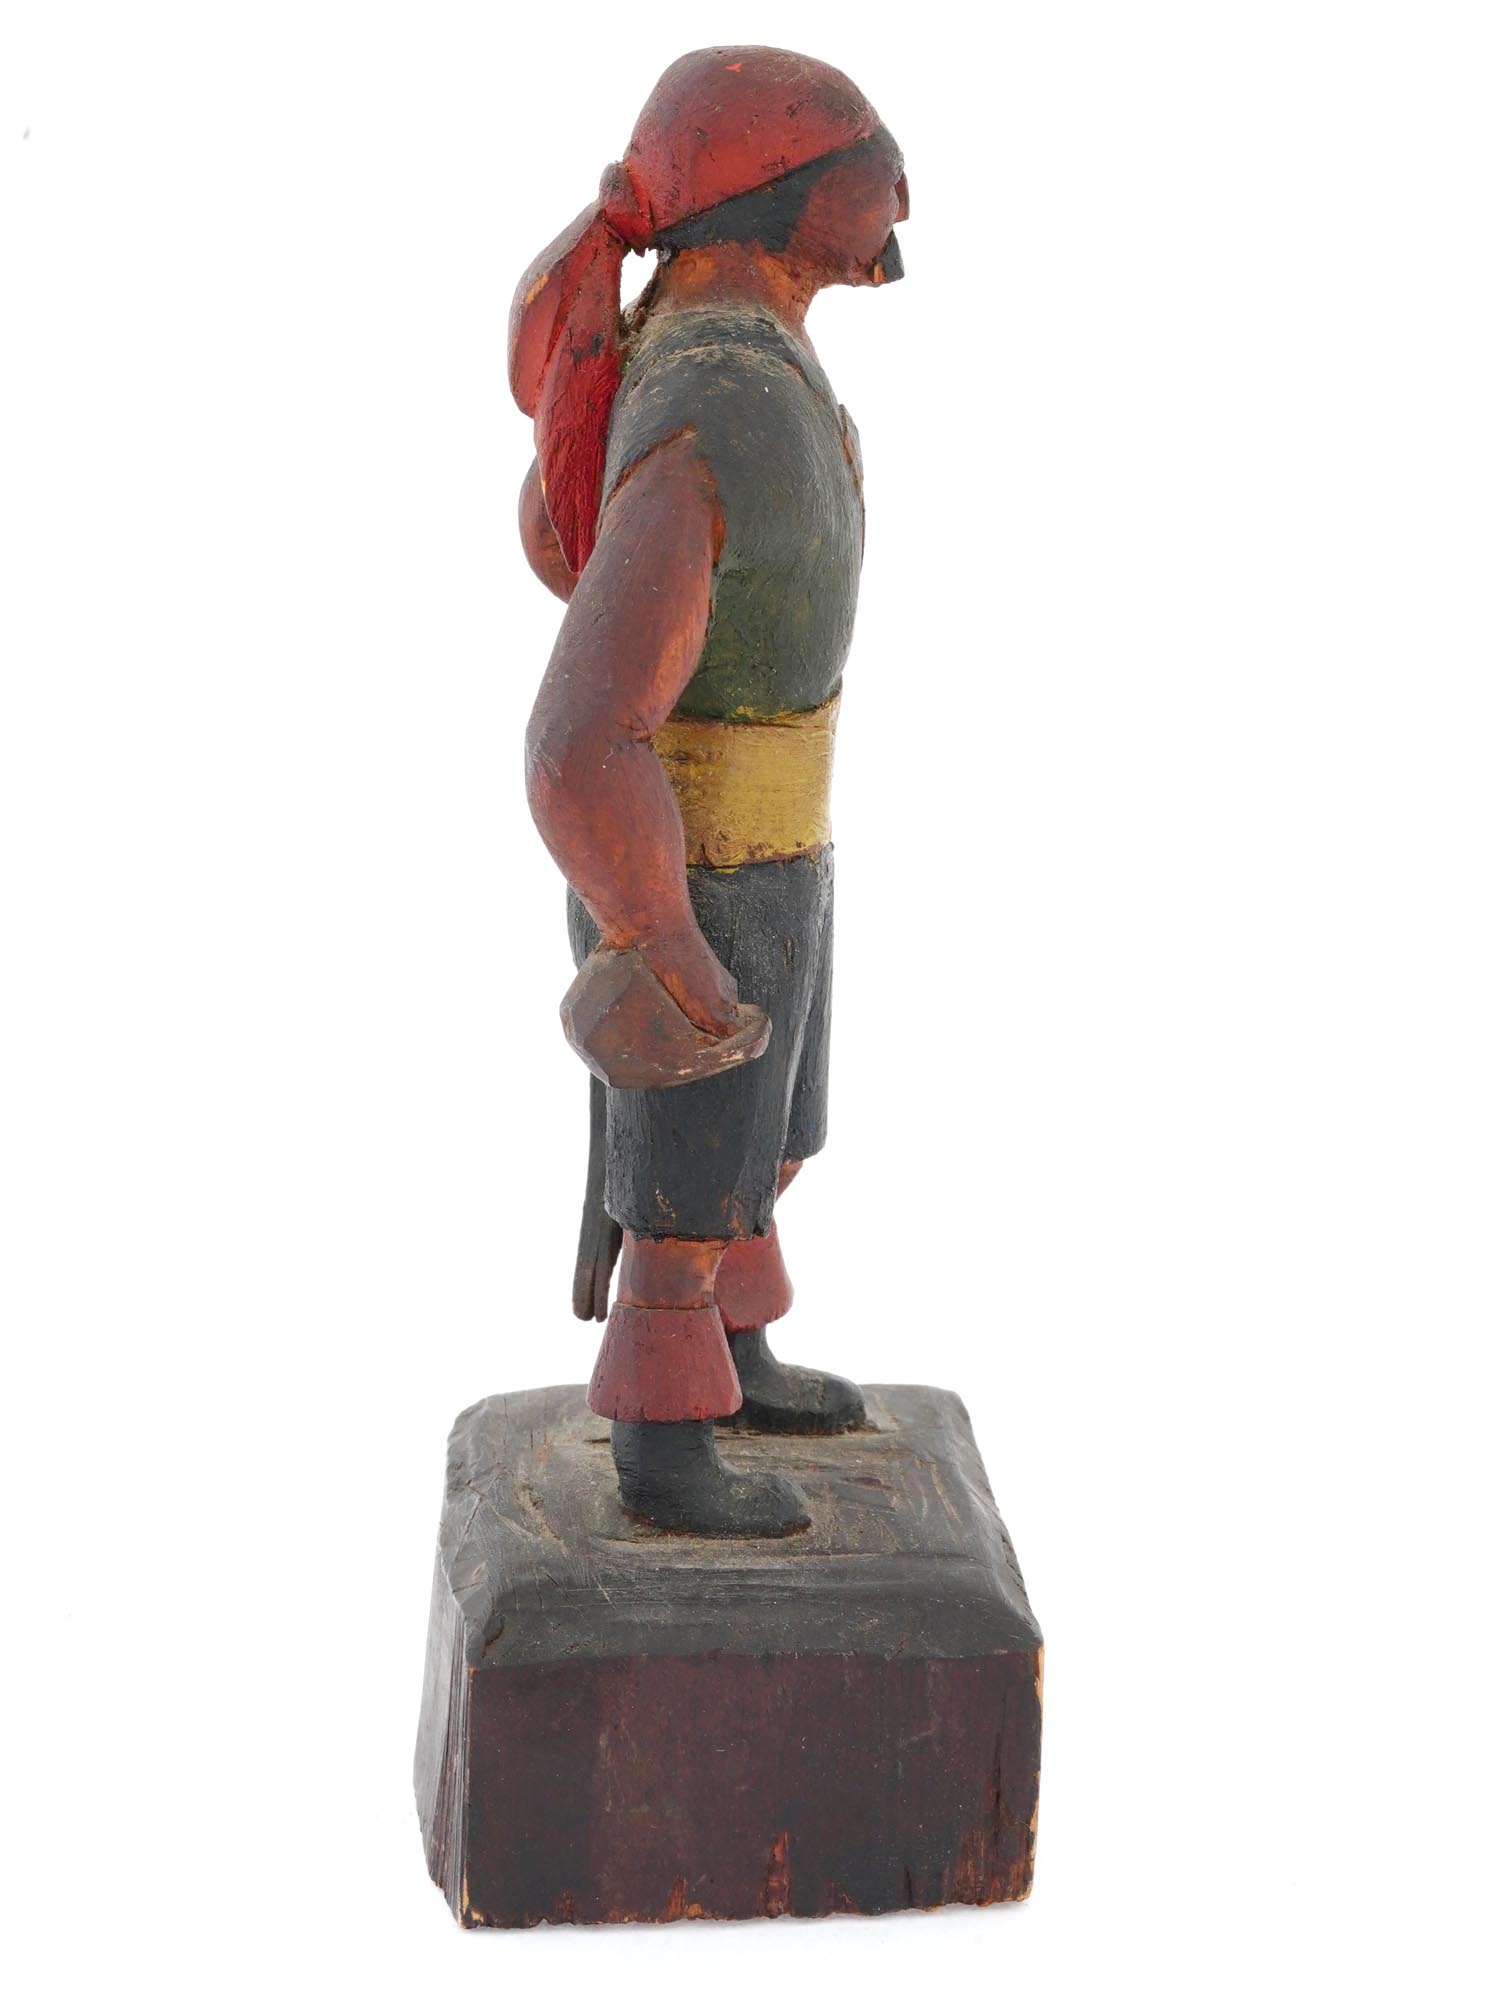 AMERICAN FOLK ART HAND CARVED WOOD FIGURE OF PIRATE PIC-4